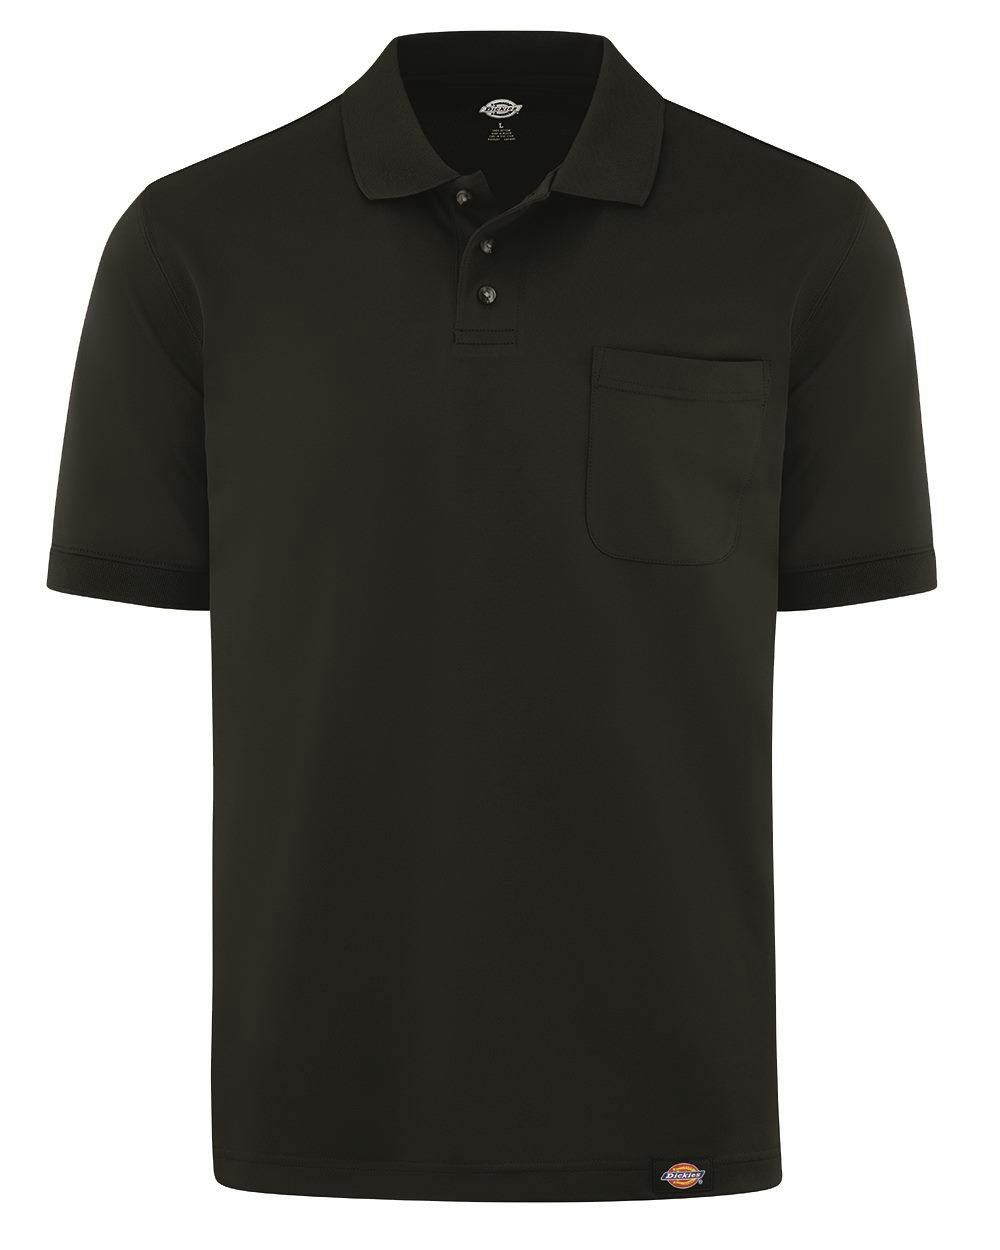 Image for Performance Short Sleeve Work Shirt With Pocket - LS44